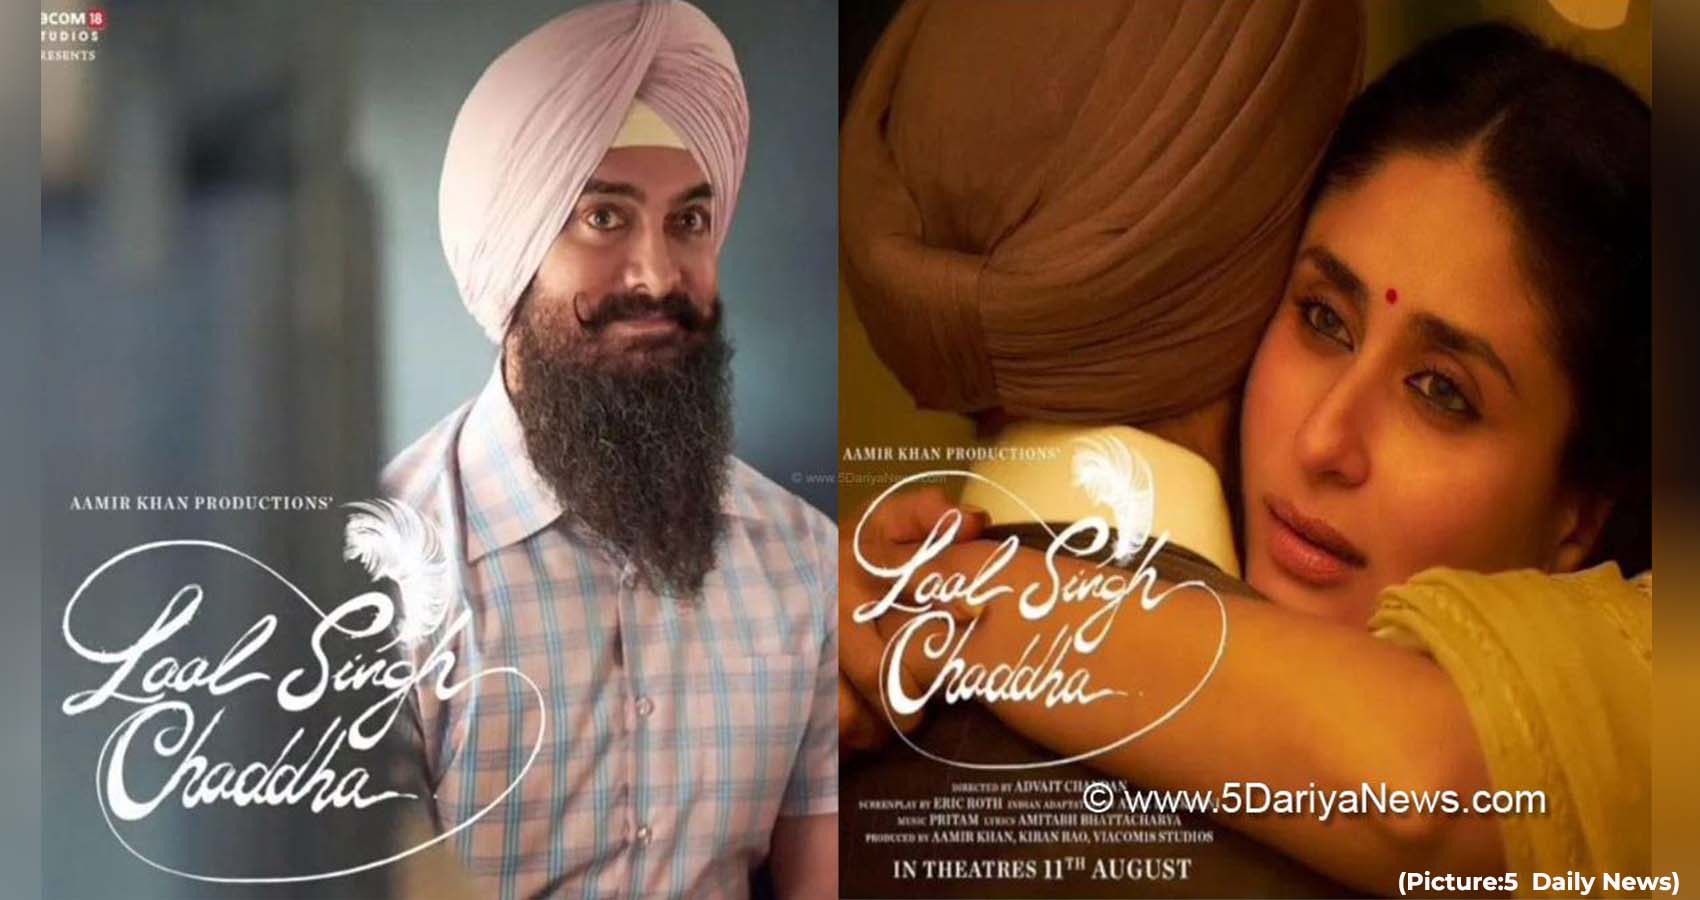 Laal Singh Chaddha Opens On August 11th